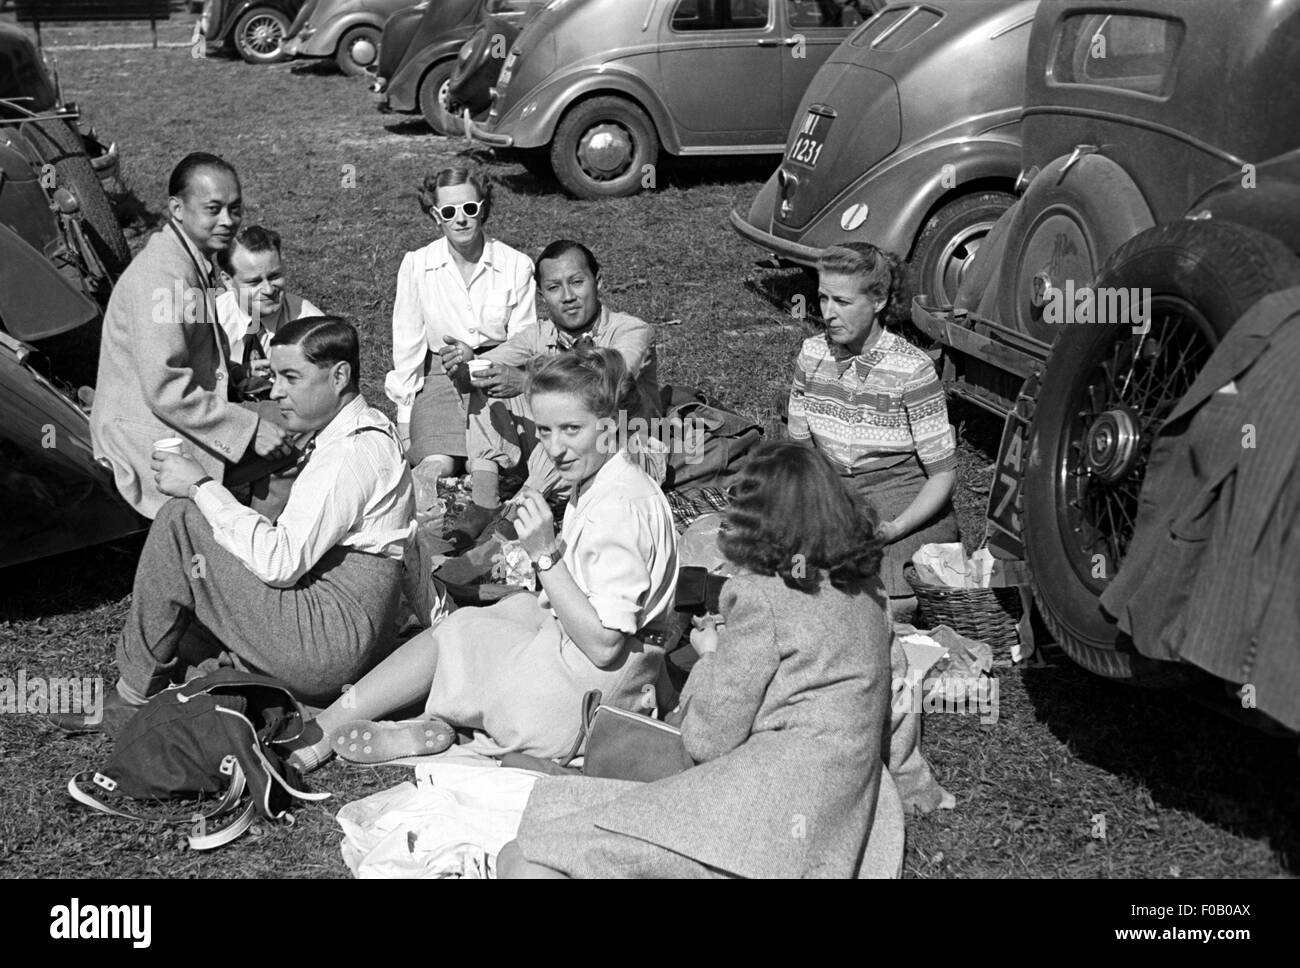 Prince Bira with group of people at a picnic in a car park Stock Photo